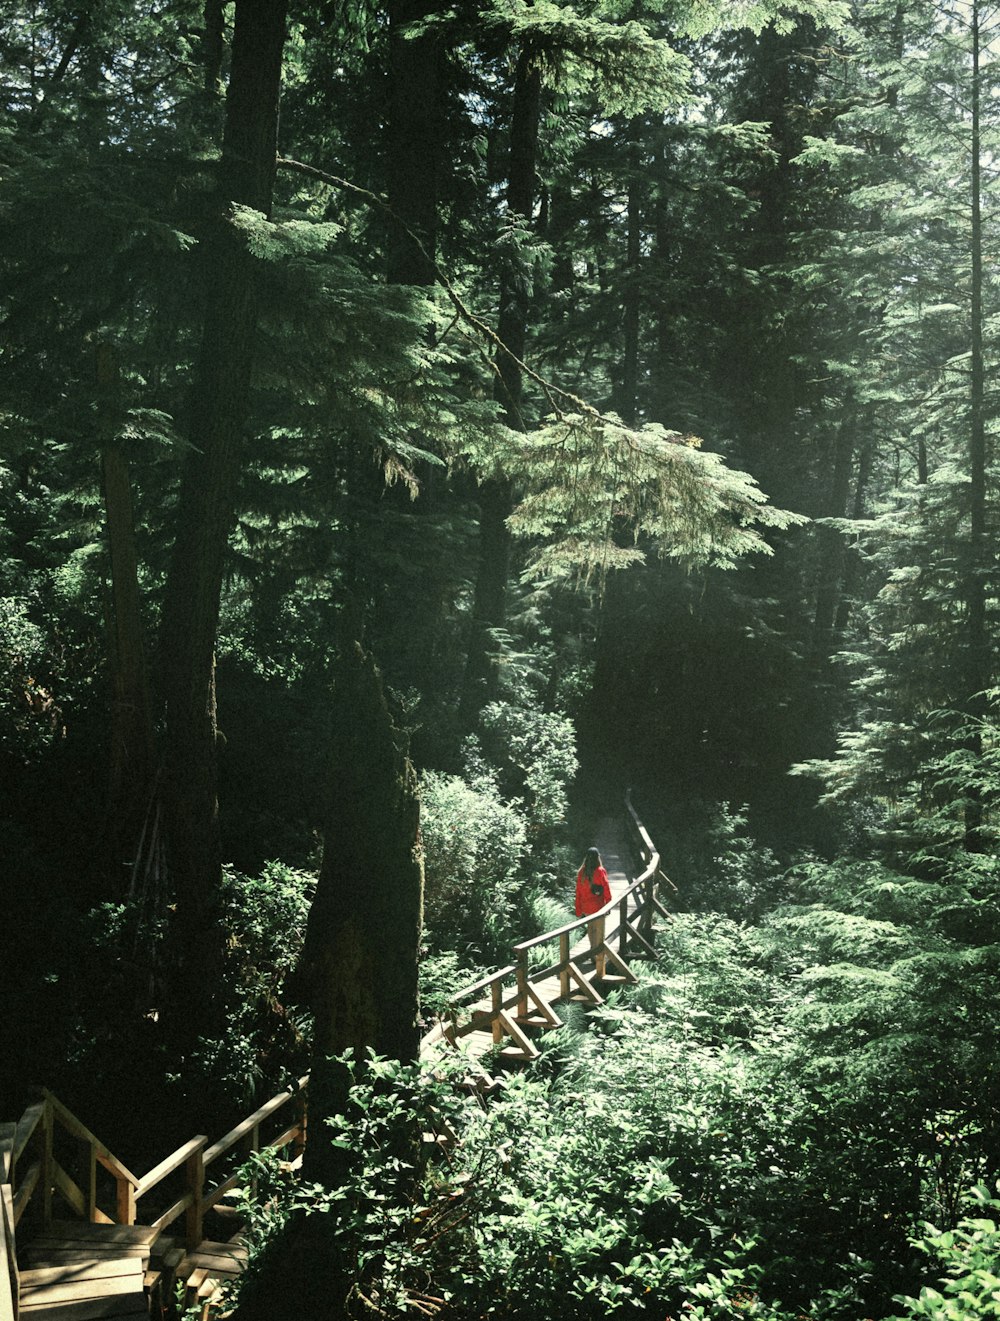 a person walking across a wooden bridge in a forest